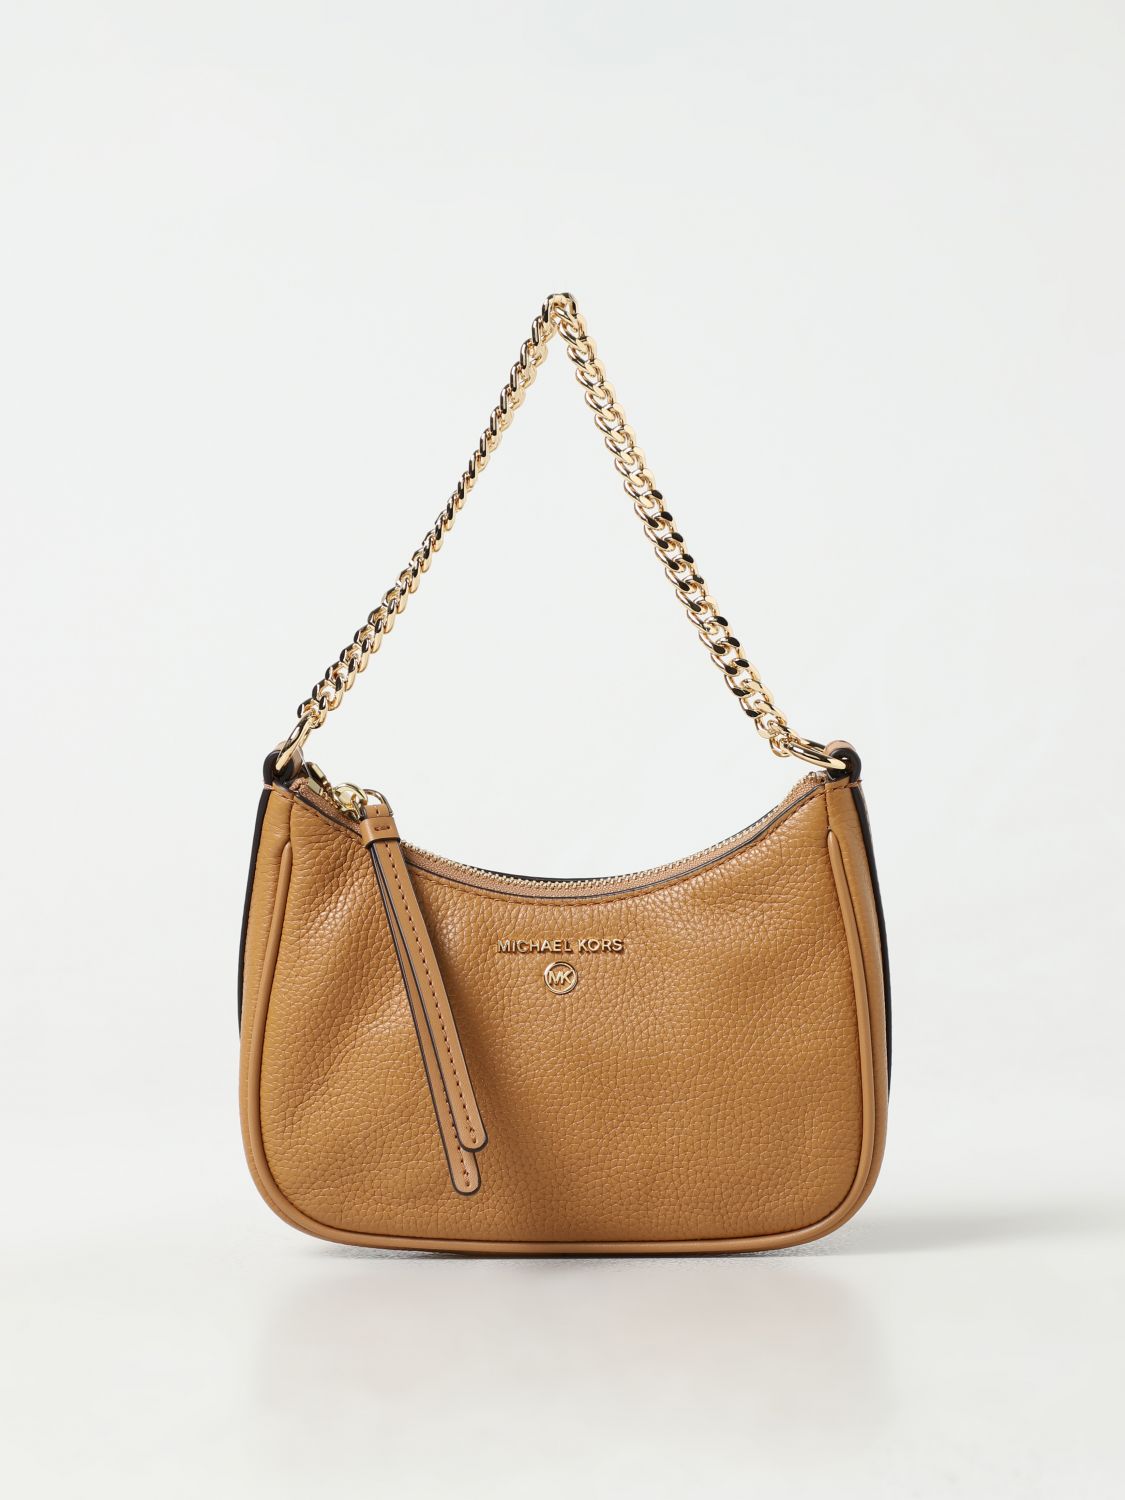 Michael Kors Kendall Grained Leather Bag In Beige